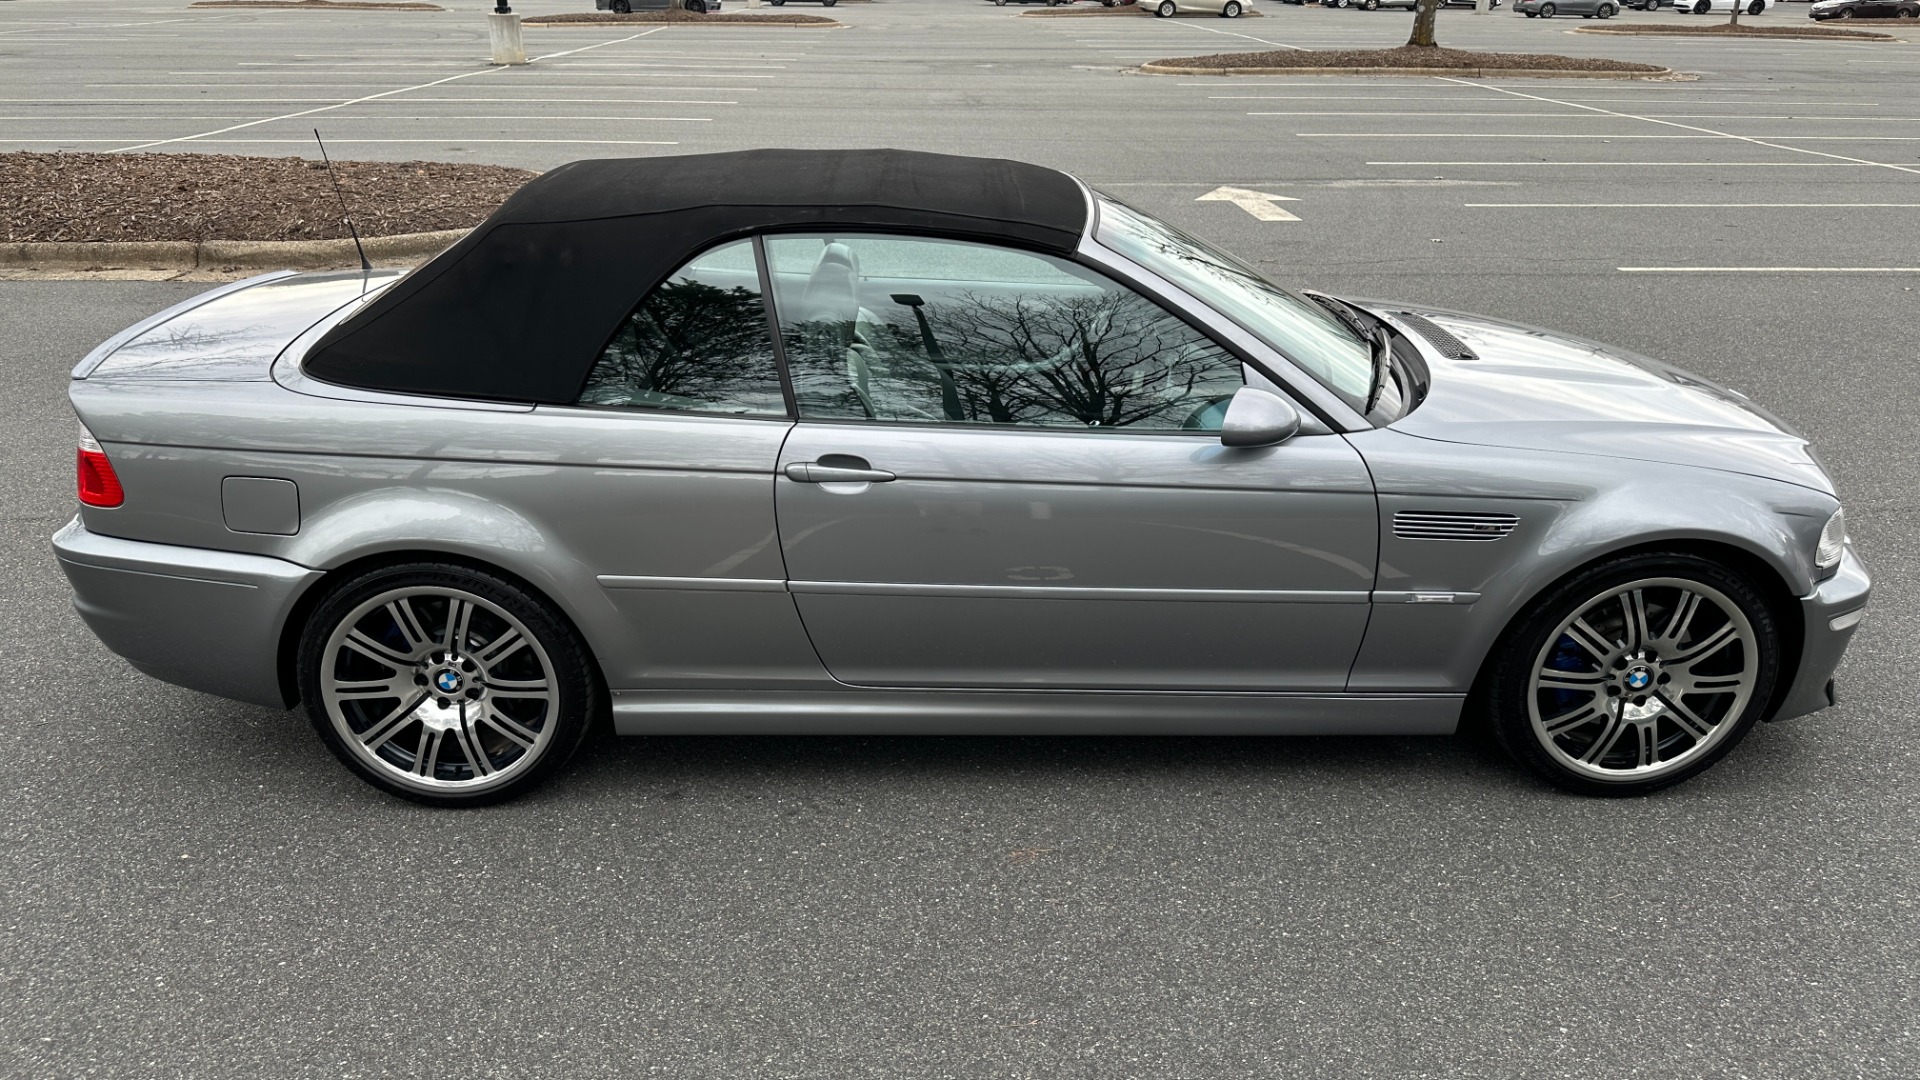 Used 2006 BMW M3 CONVERTIBLE / SMG AUTO / LEATHER / INLINE 6CYL / CARBON FIBER for sale $26,995 at Formula Imports in Charlotte NC 28227 38